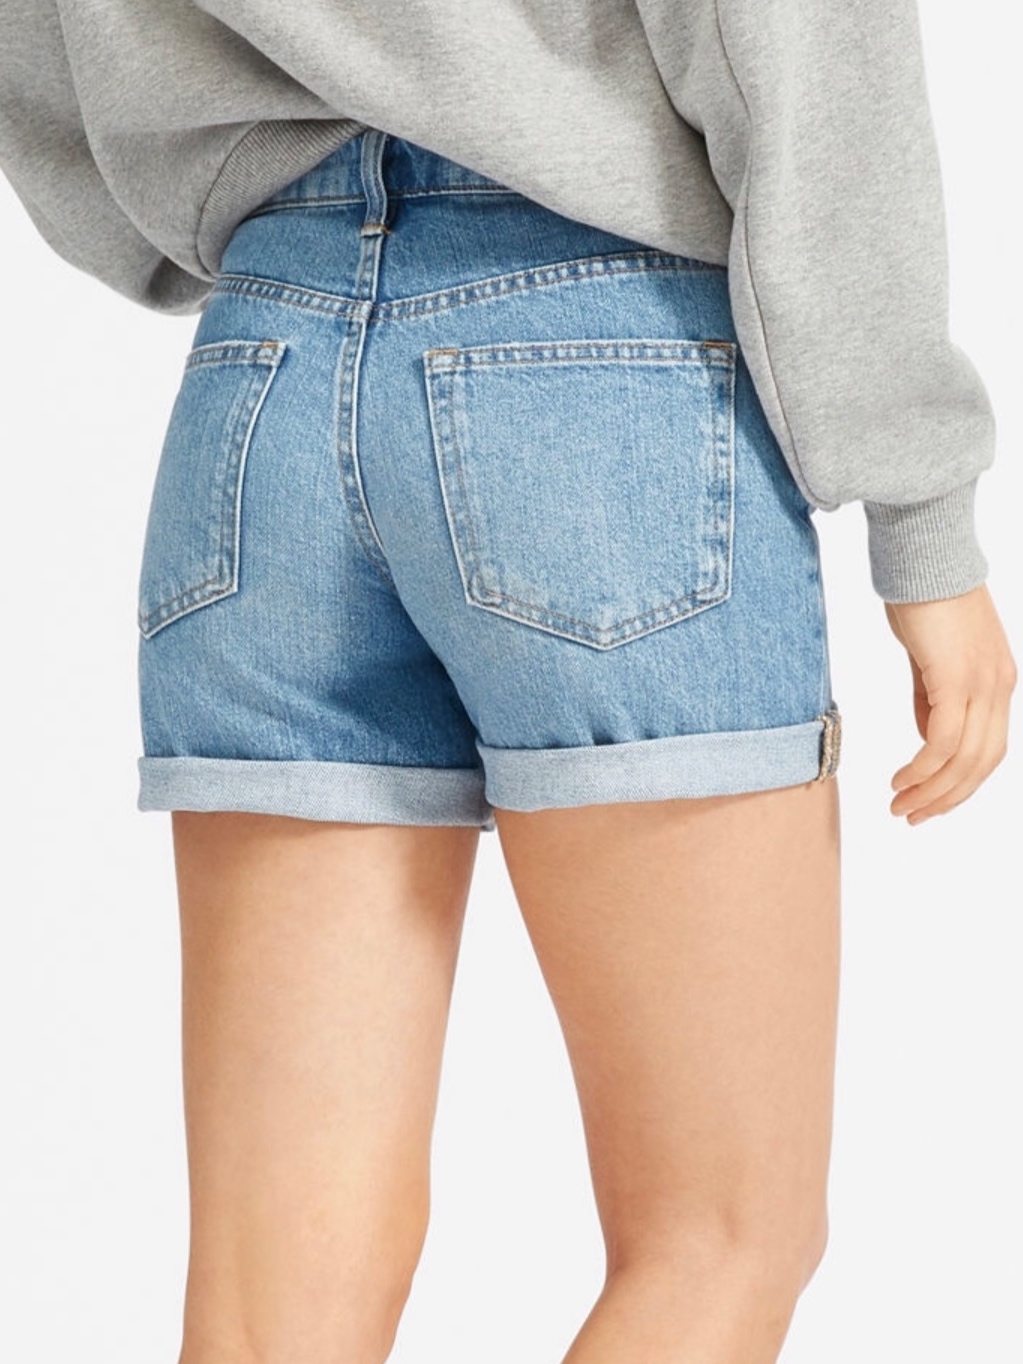 Thick Cheeks in Jean Shorts